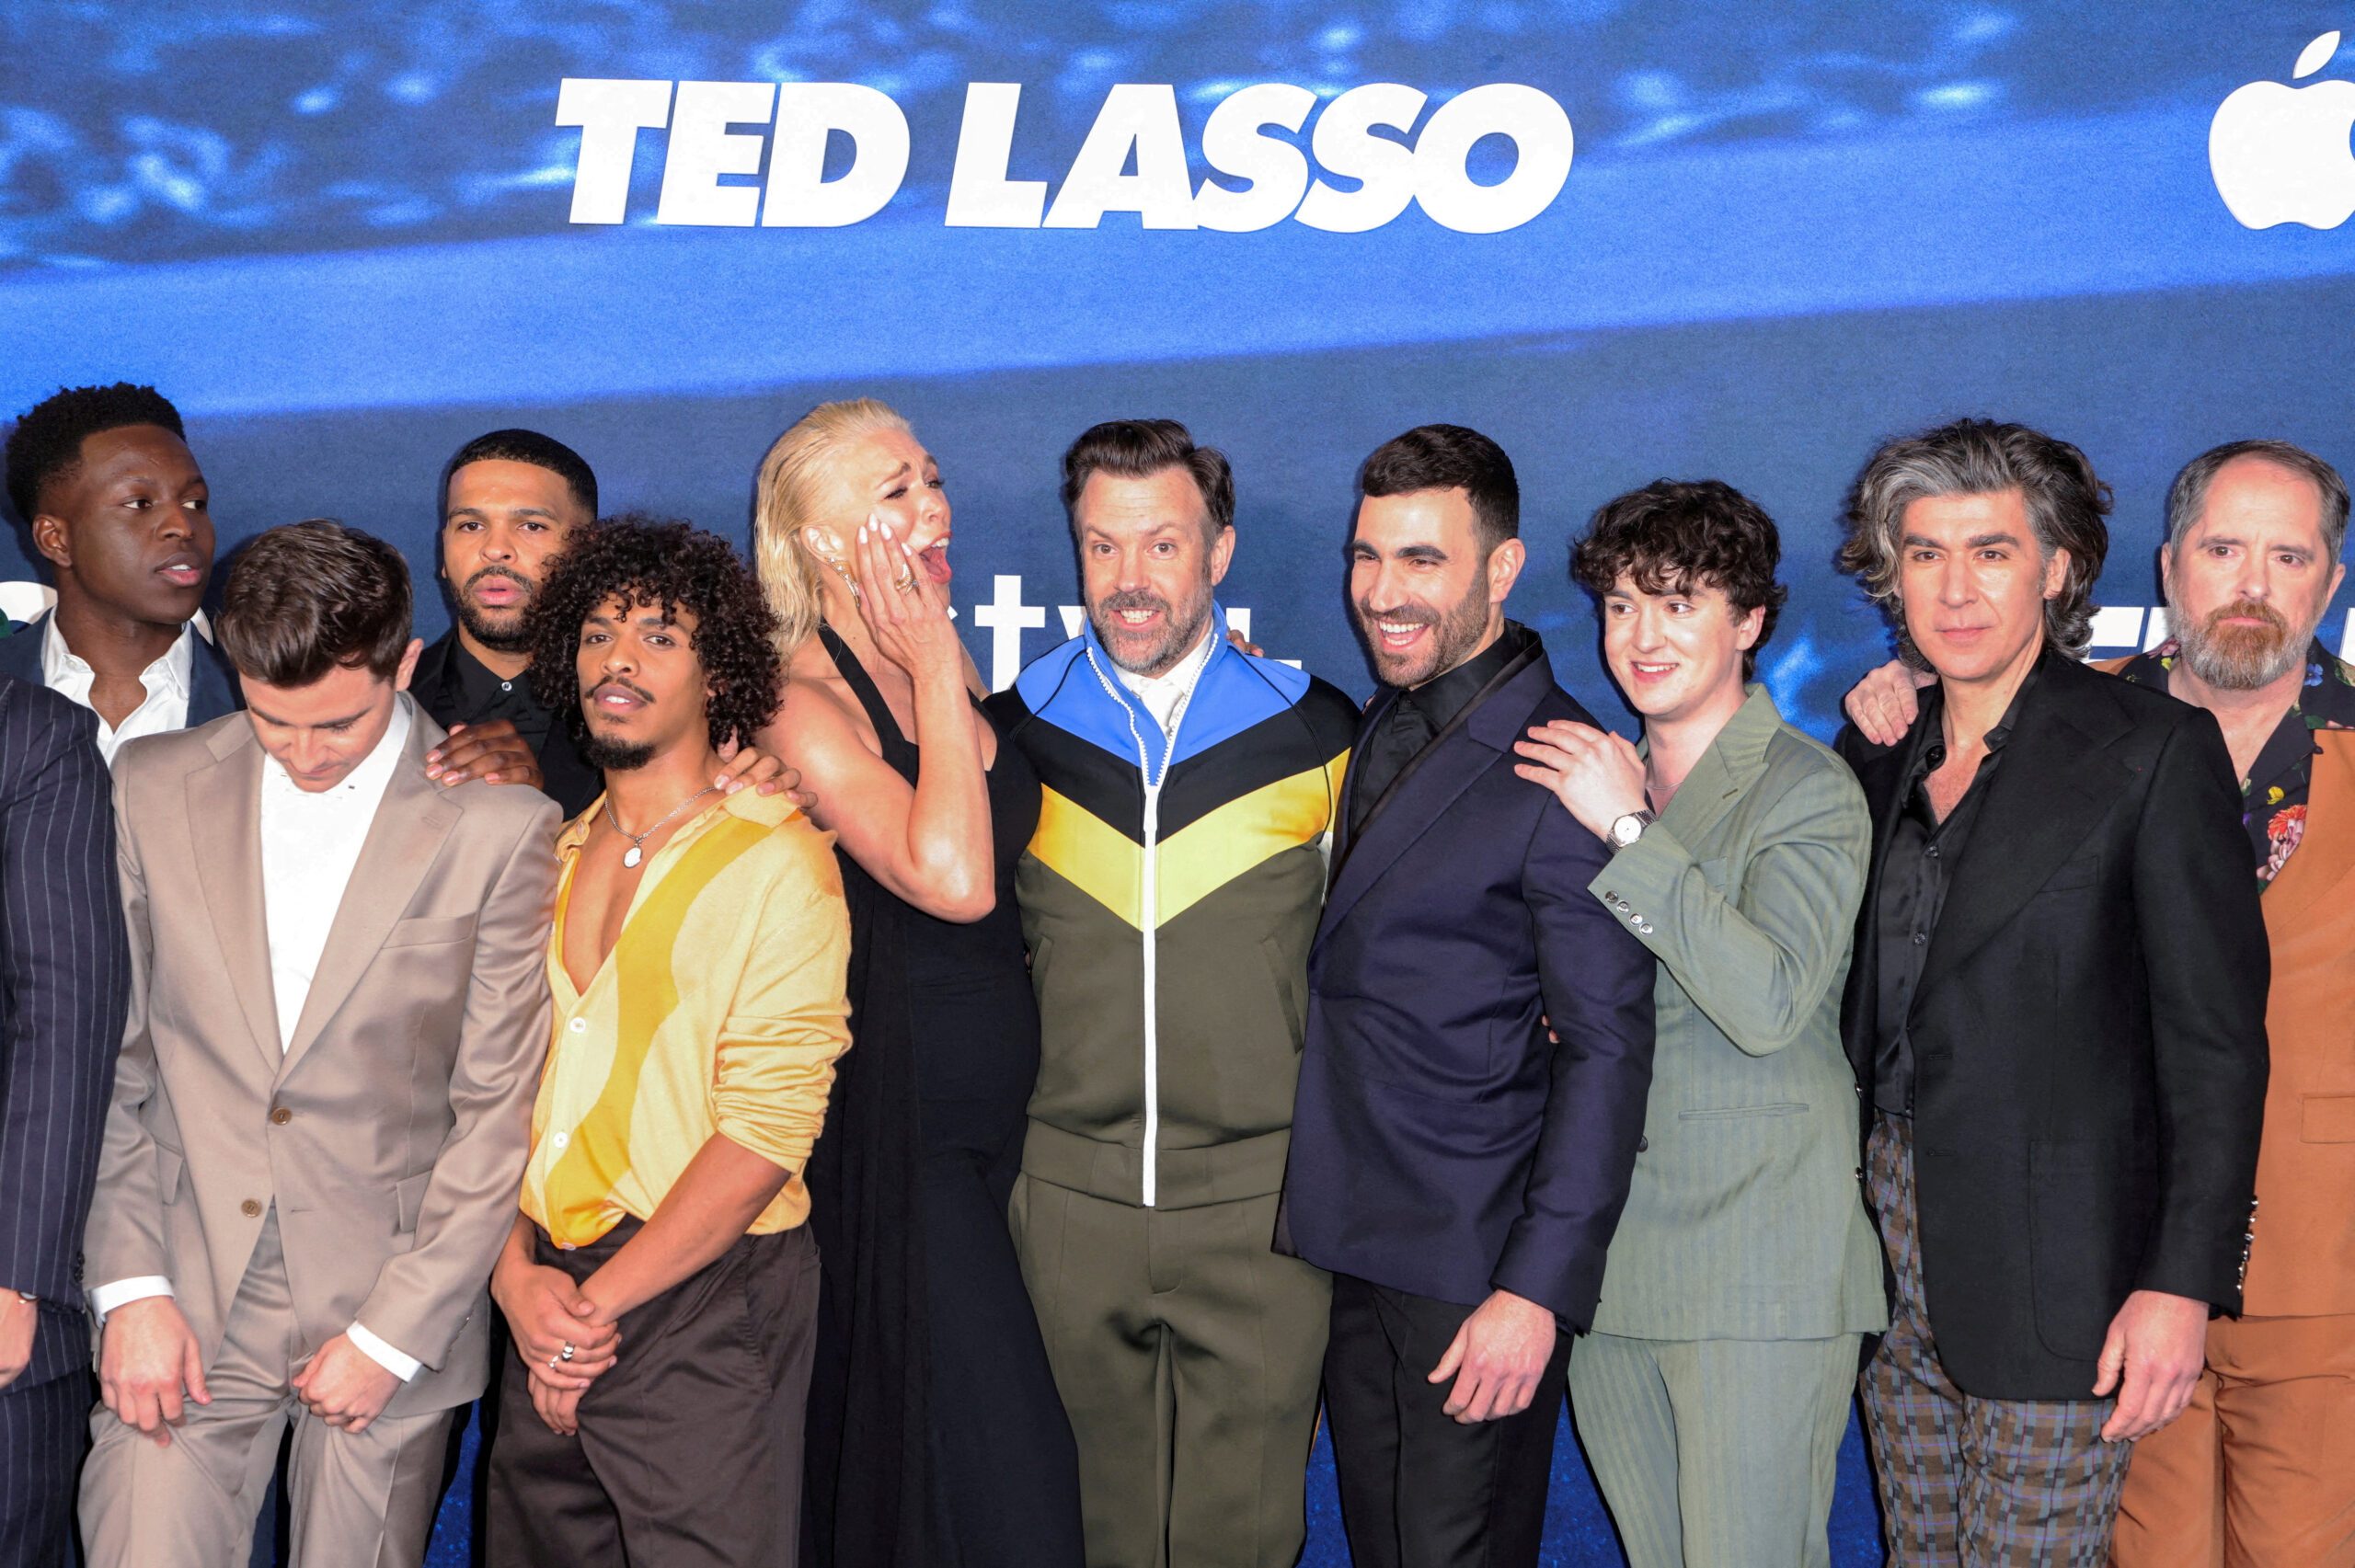 ‘Ted Lasso’ season 3: discouraged players revitalized by team love